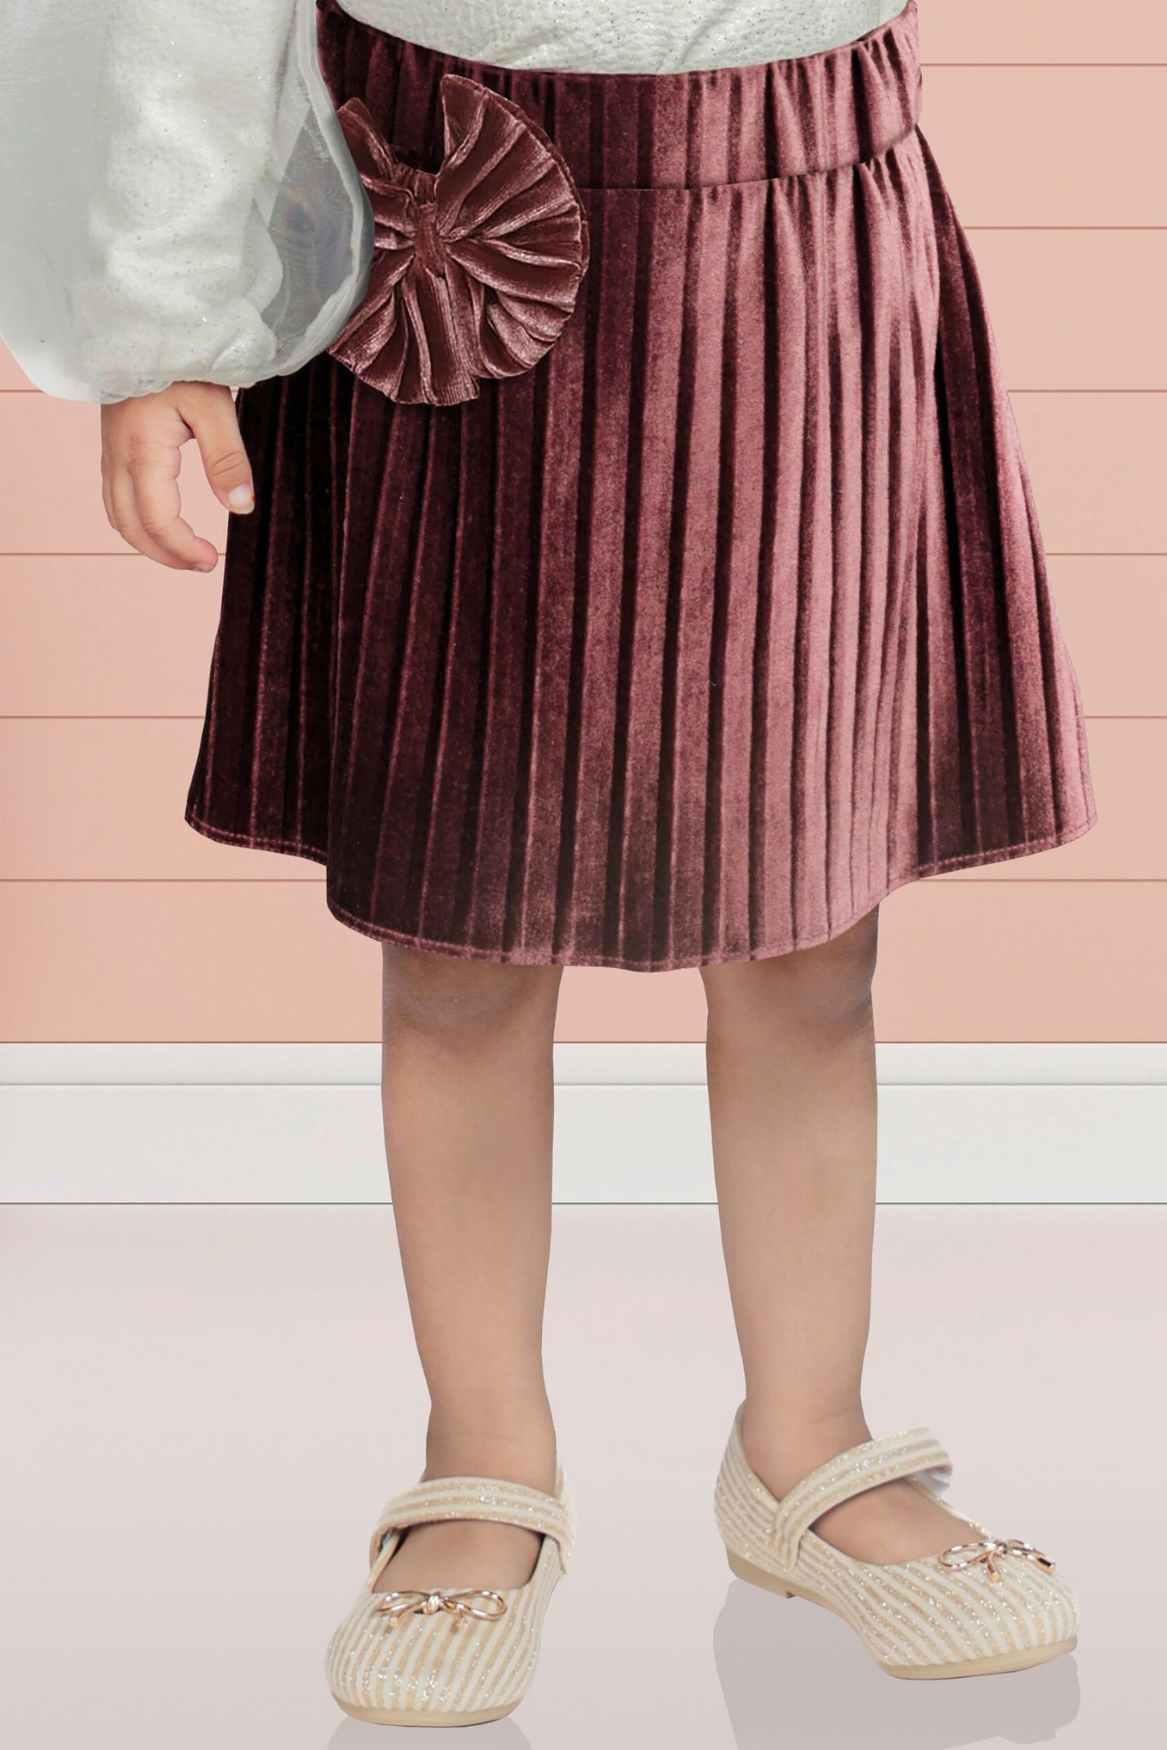 Maroon Pleated Skirt Set With White Top With Bulgarian Sleeves For Girls - Lagorii Kids